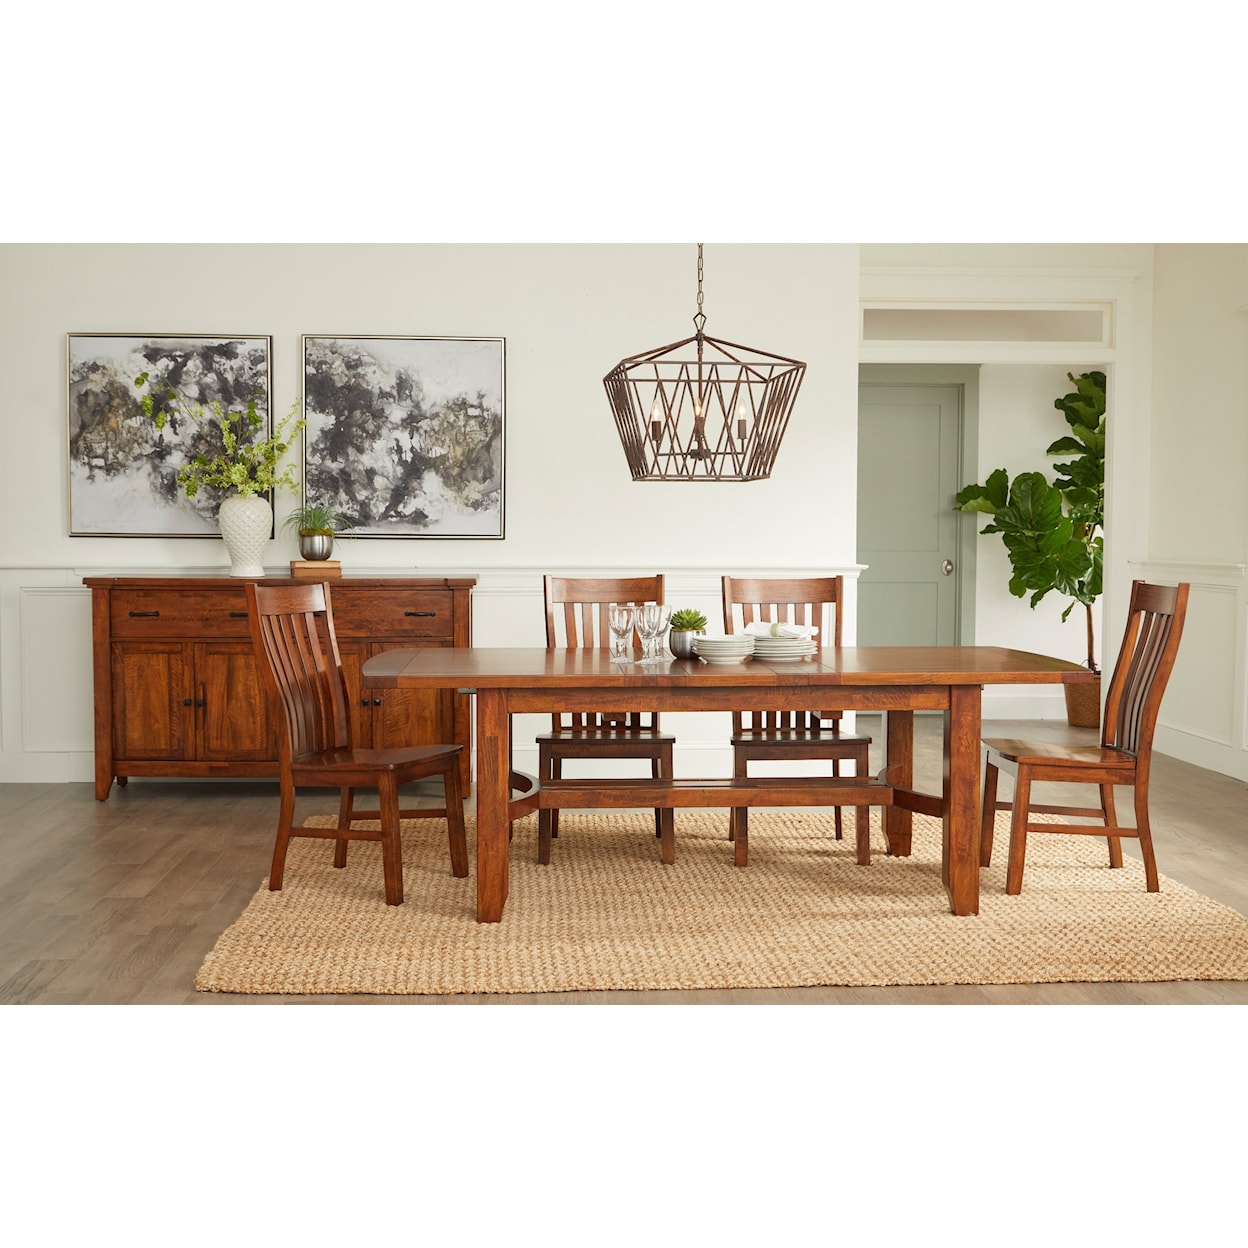 Virginia Furniture Market Solid Wood Whittier Dining Table